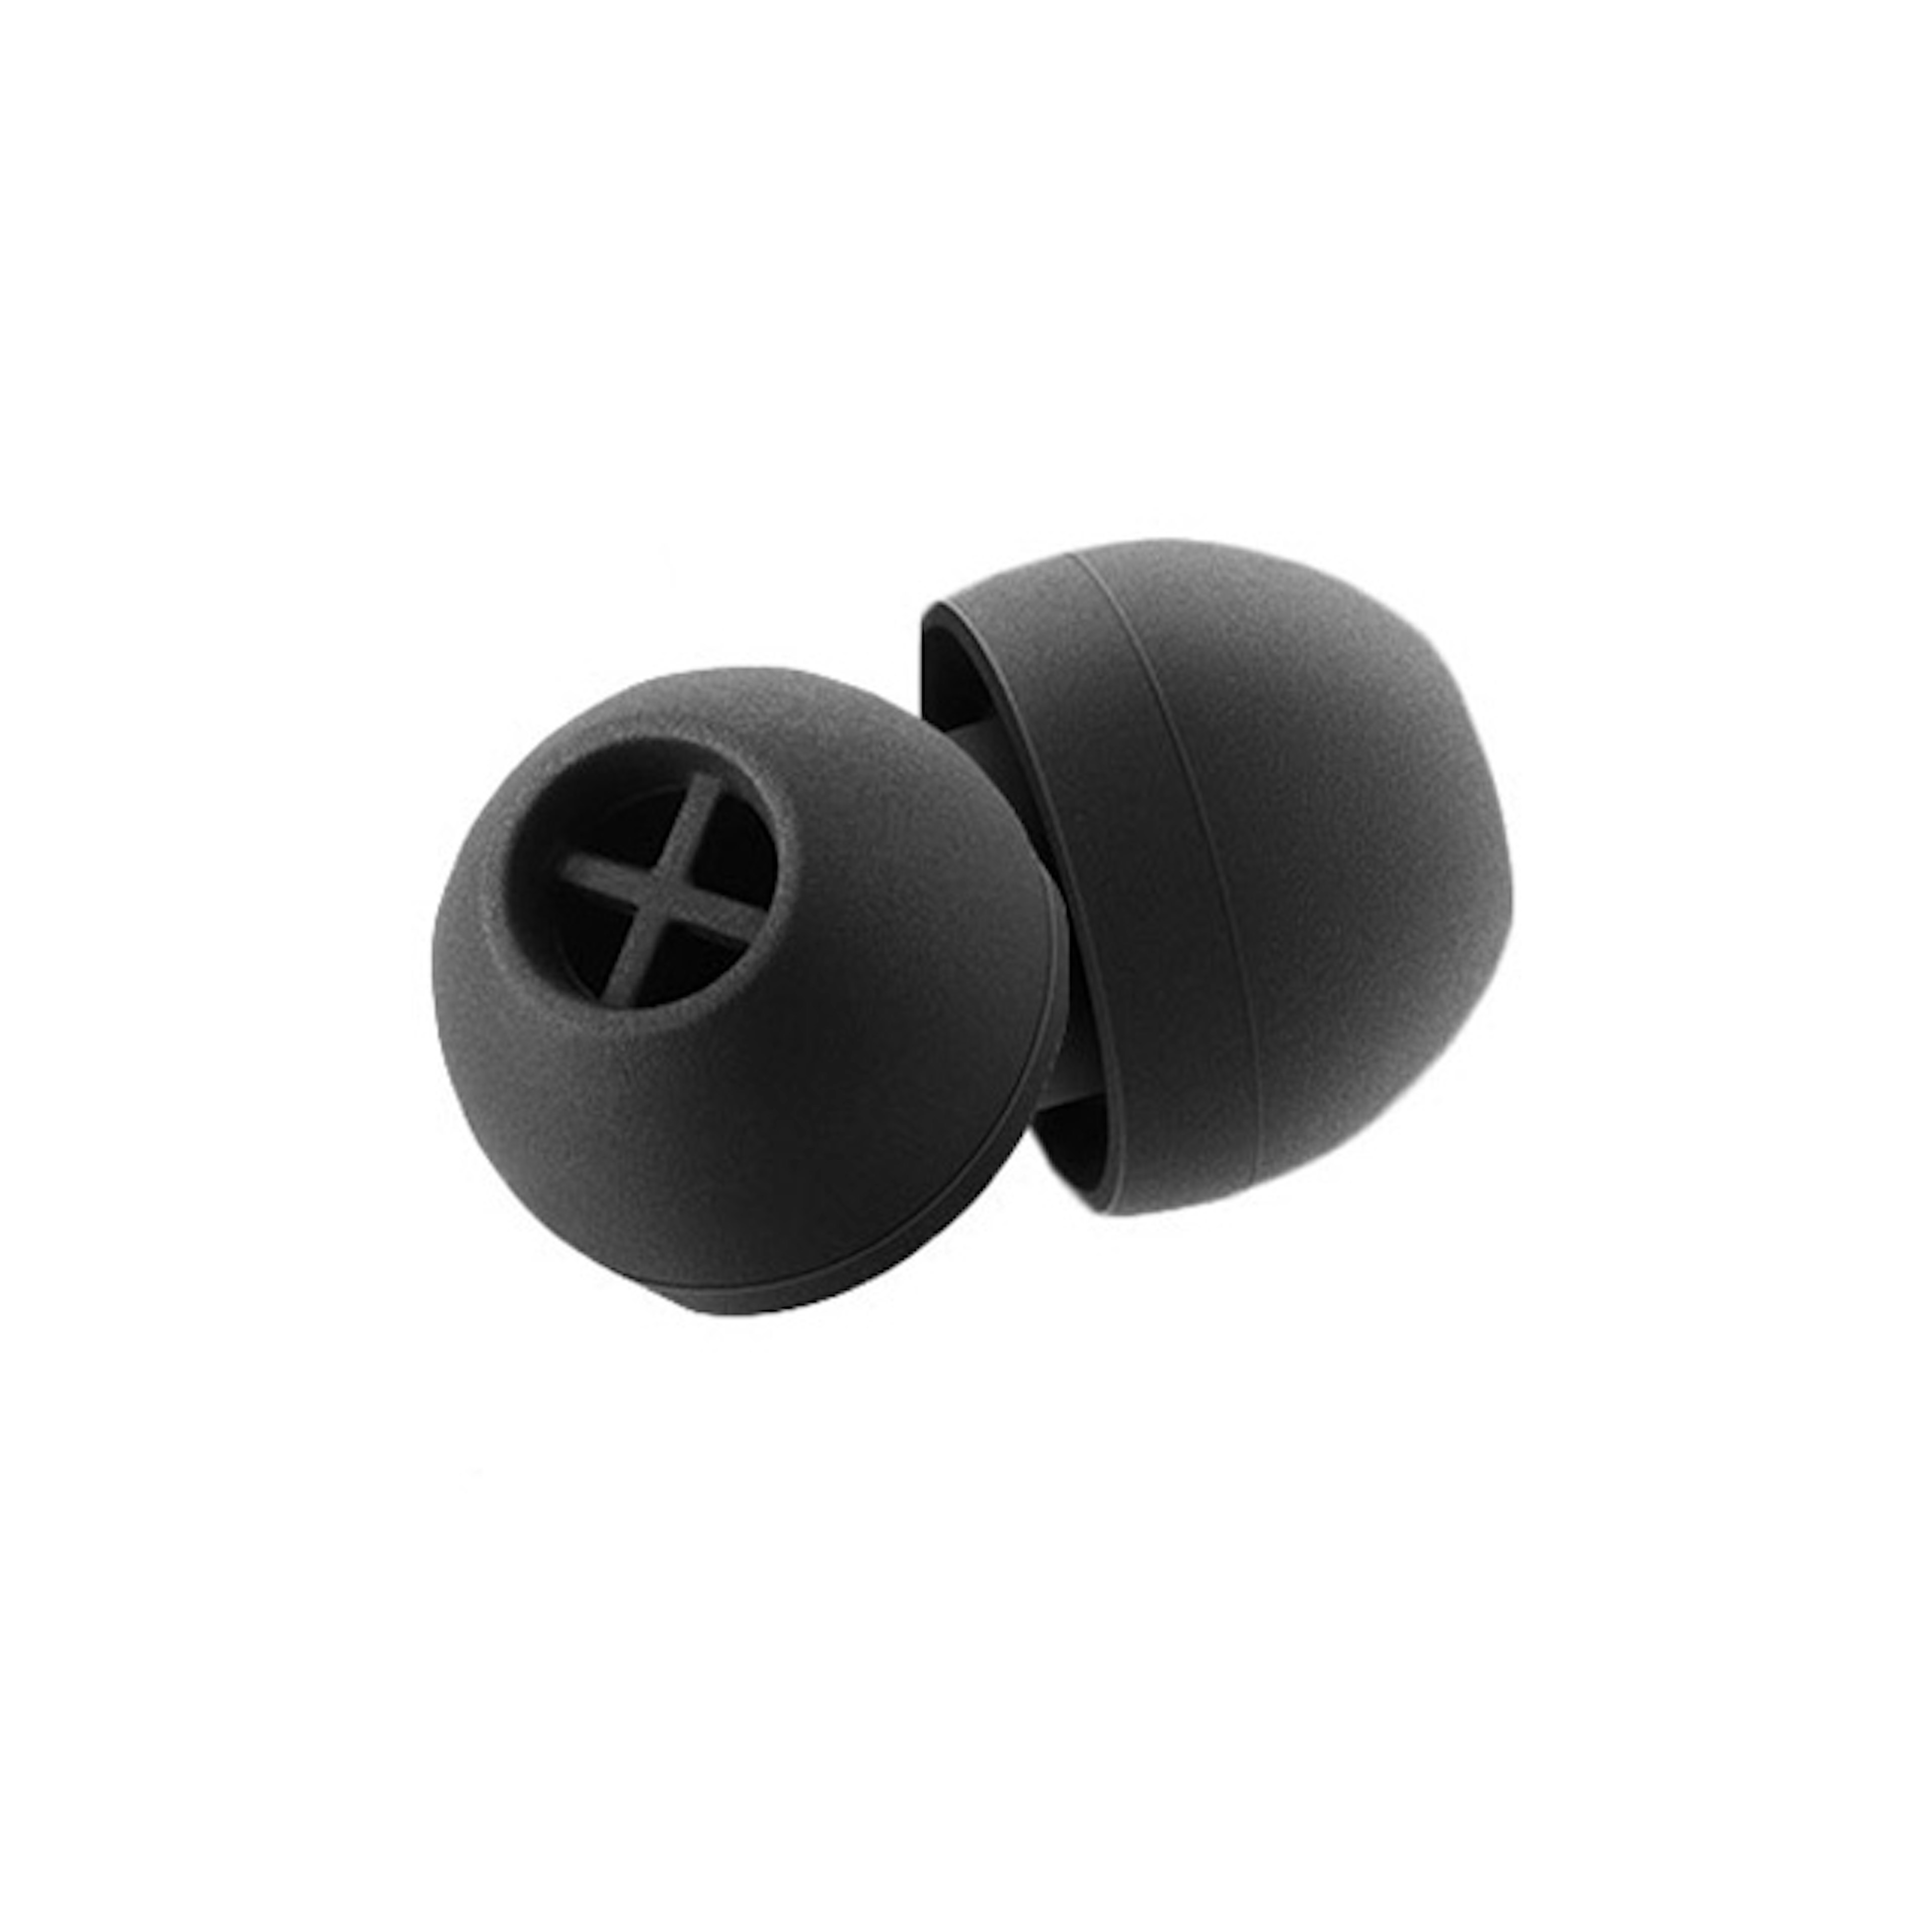 Silicone Ear adapter, black, 5 pair (M)